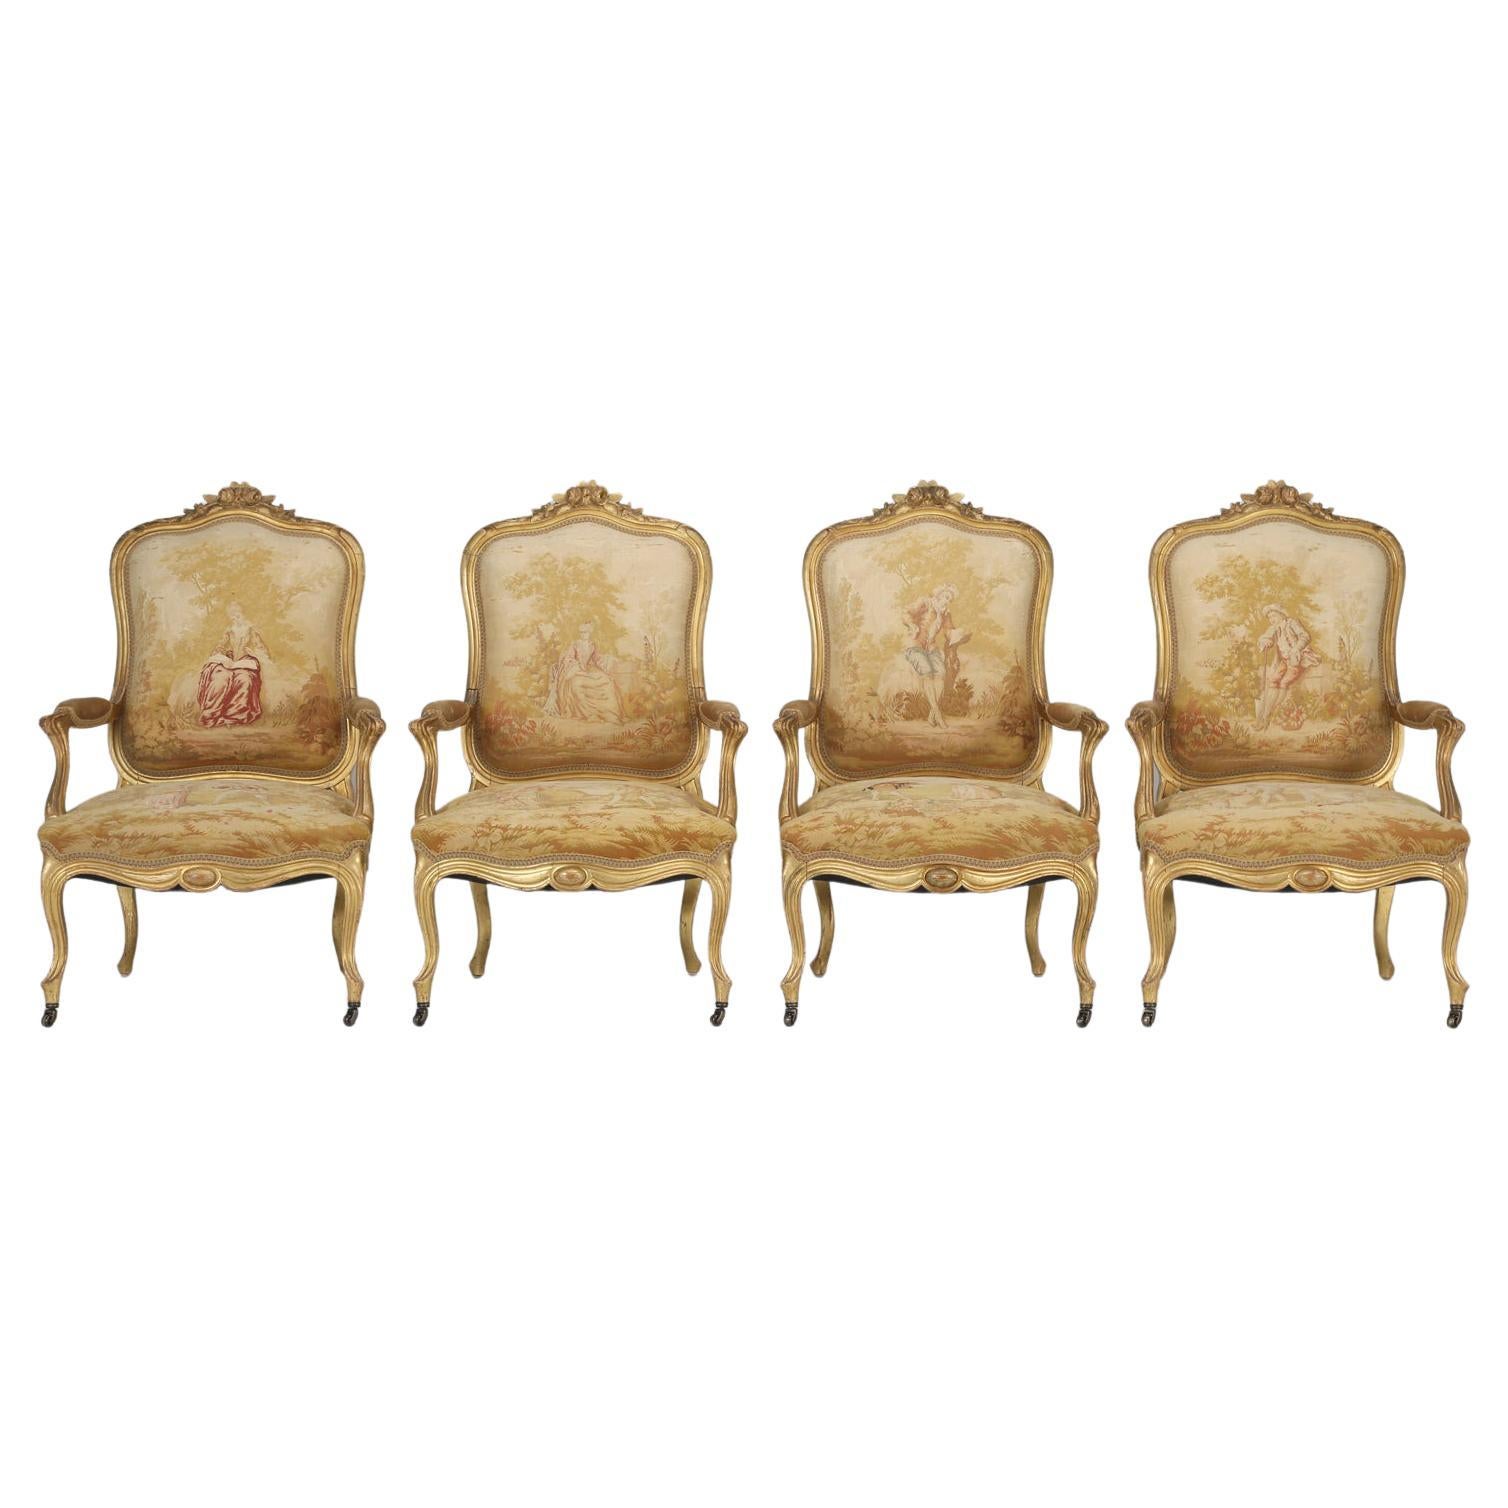 Antique French Louis XV Style Arm Chairs in Original Fabric and Gilt Frames For Sale